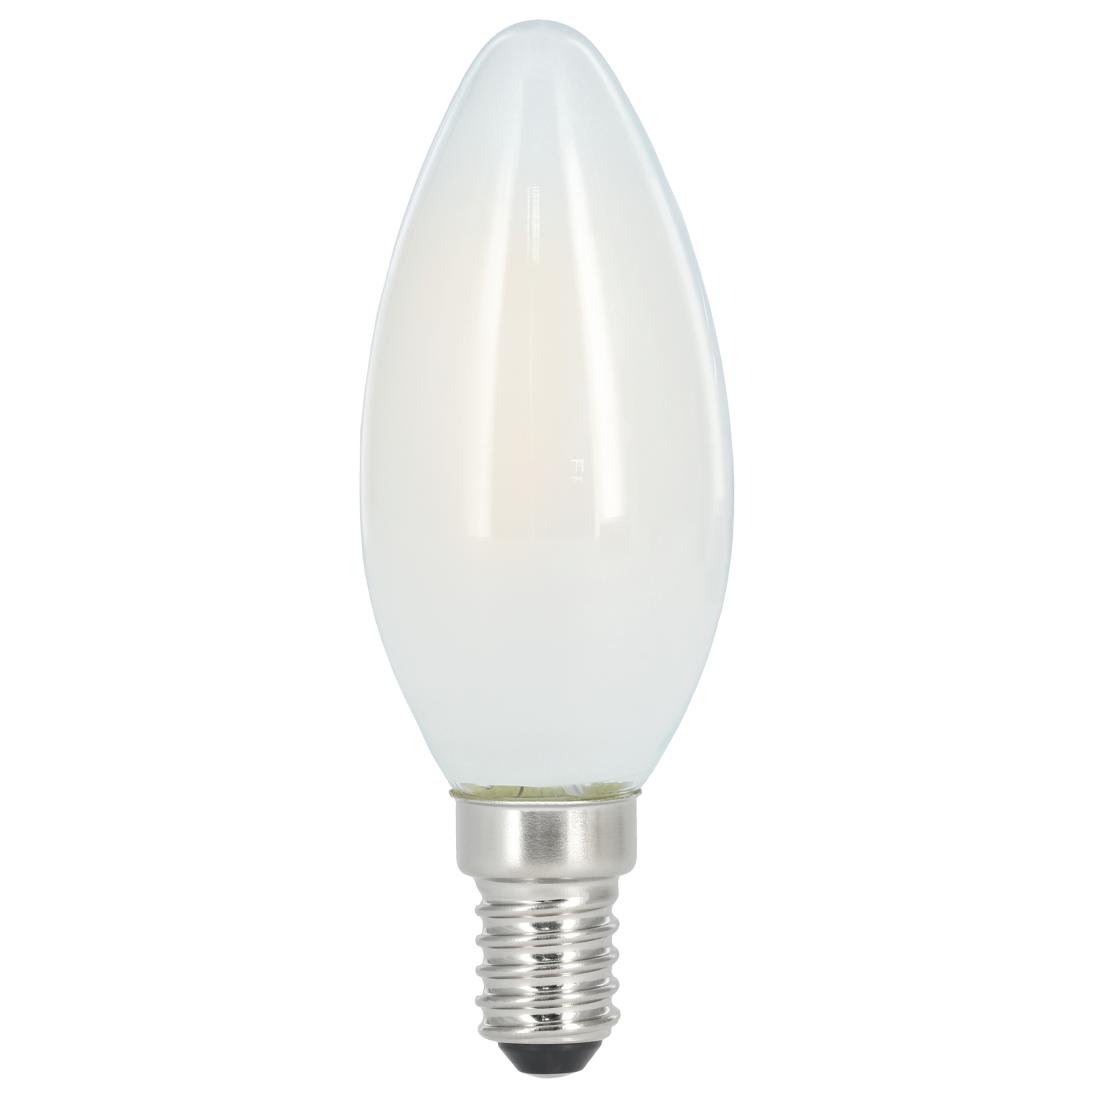 abx High-Res Image - Xavax, LED Filament, E14, 470 lm Replaces 40 W, Candle Bulb, Daylight, matt